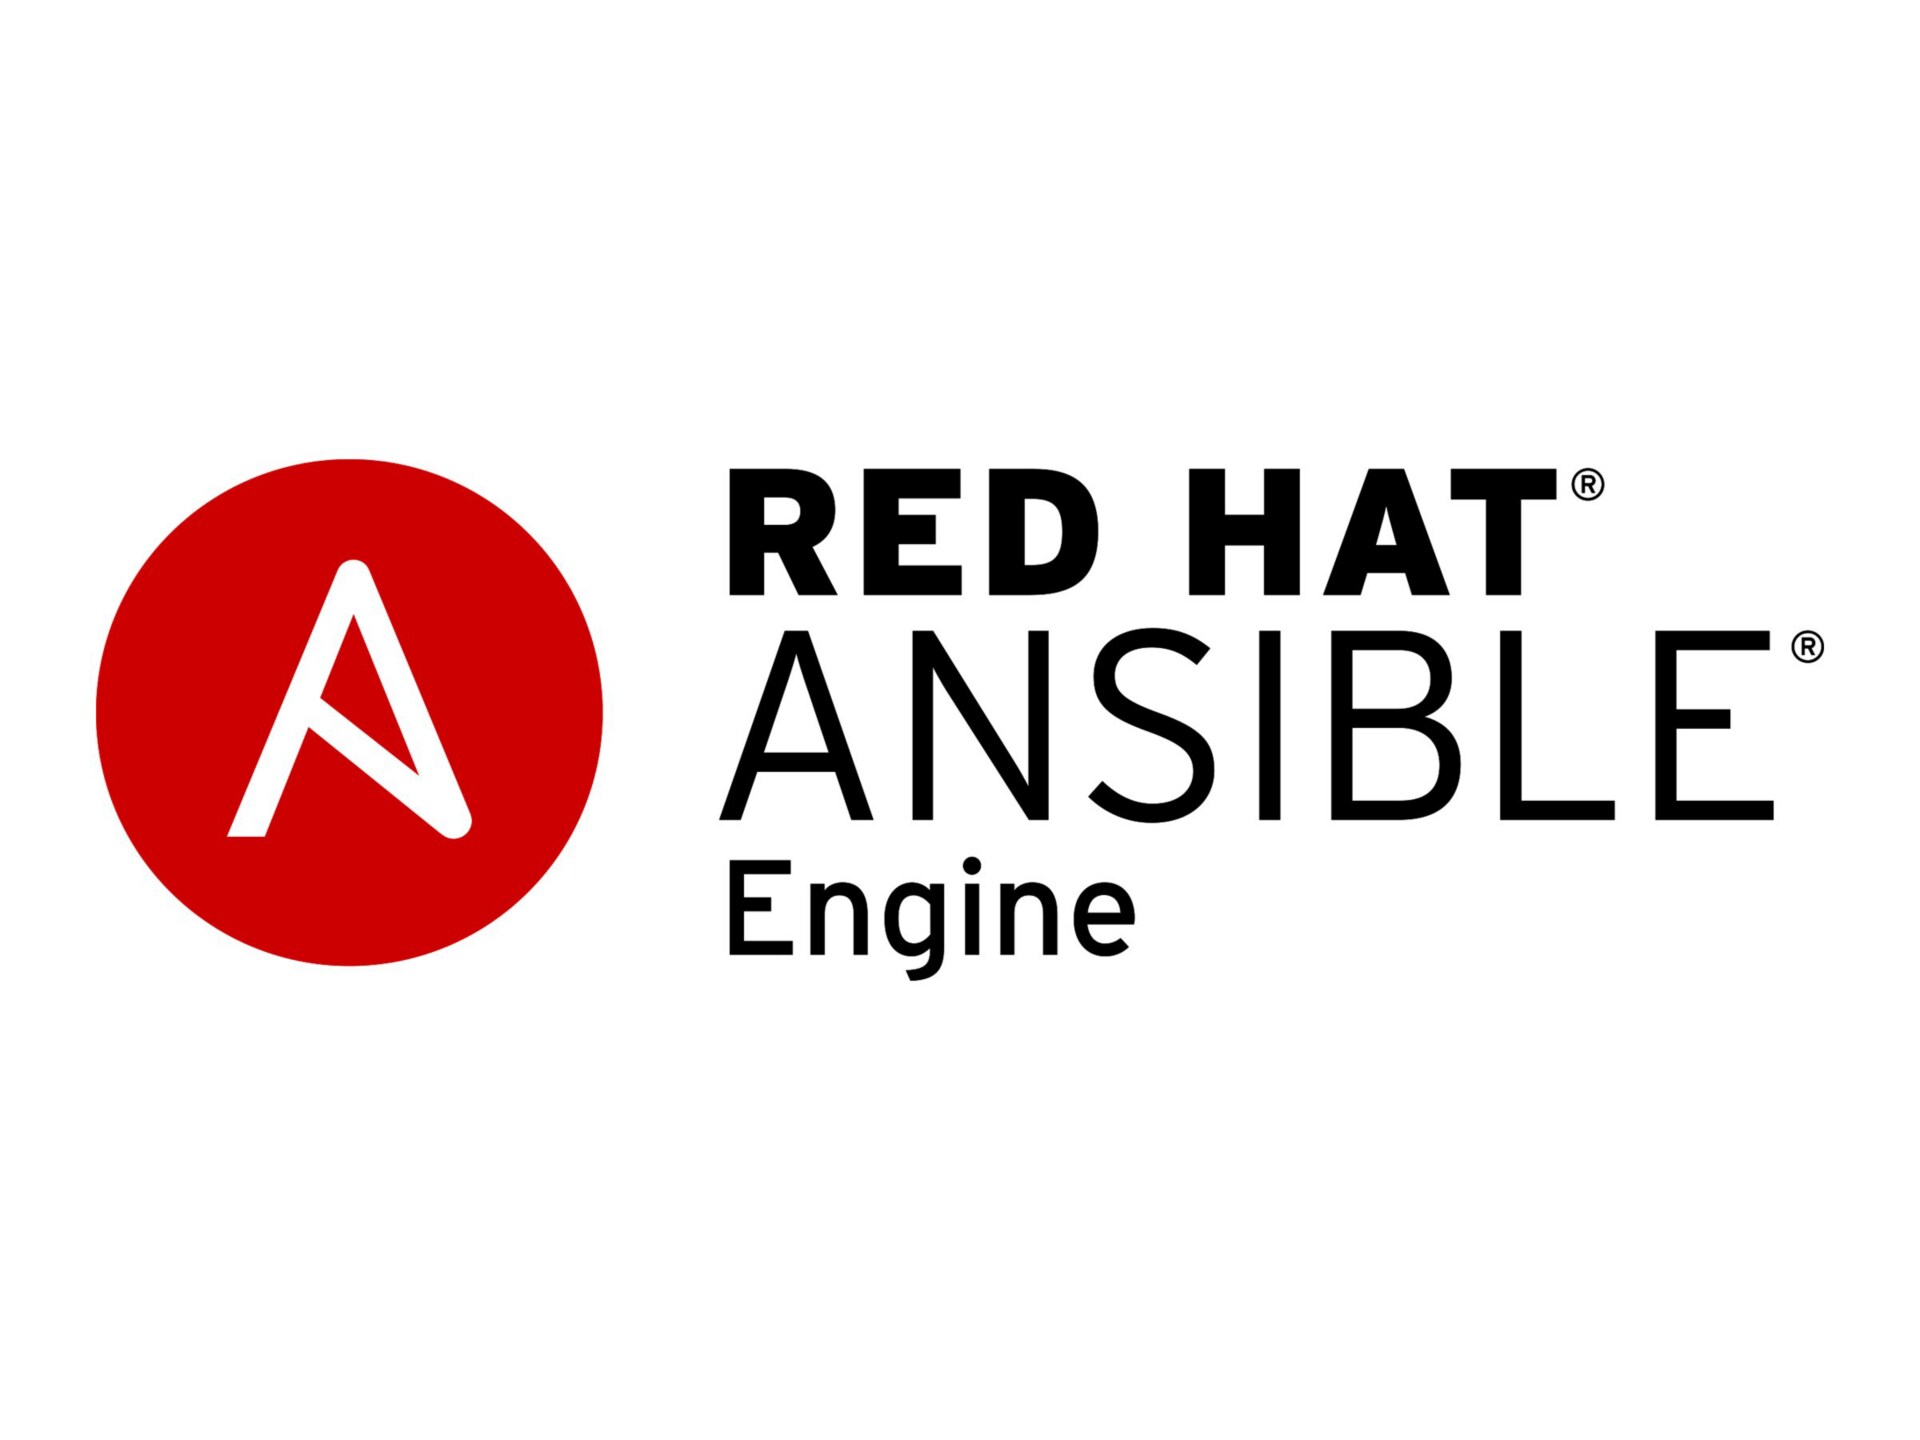 Red Hat Ansible Engine Standard - subscription license + 3 Years 9x5 Red Ha